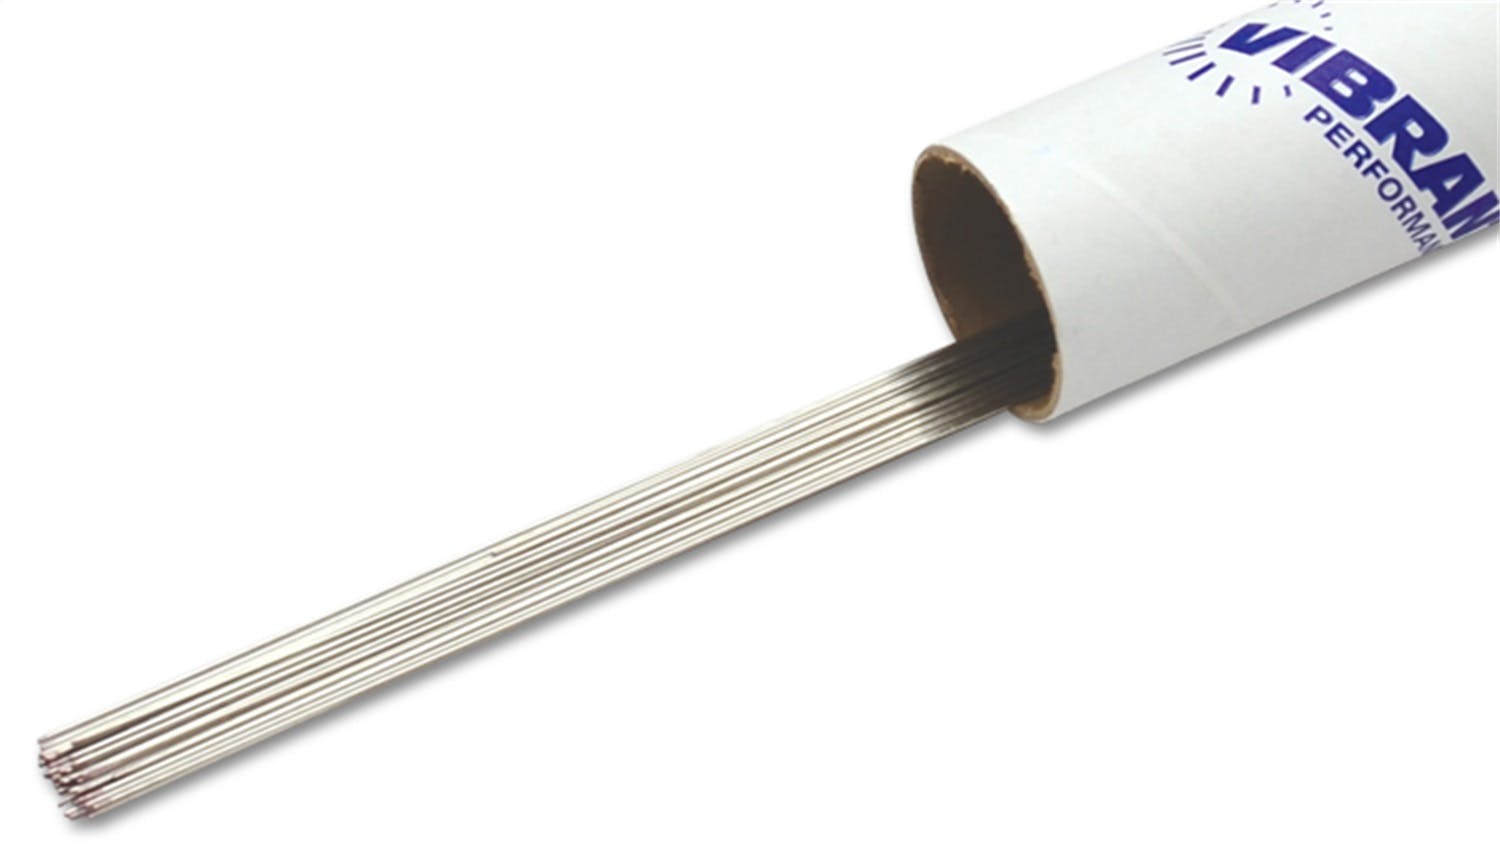 Vibrant Performance 29263 Wire Stainless Steel ER309L - 0.062 inch Thick (1.6mm) - 39.5 inch Long Rod - 3lb box